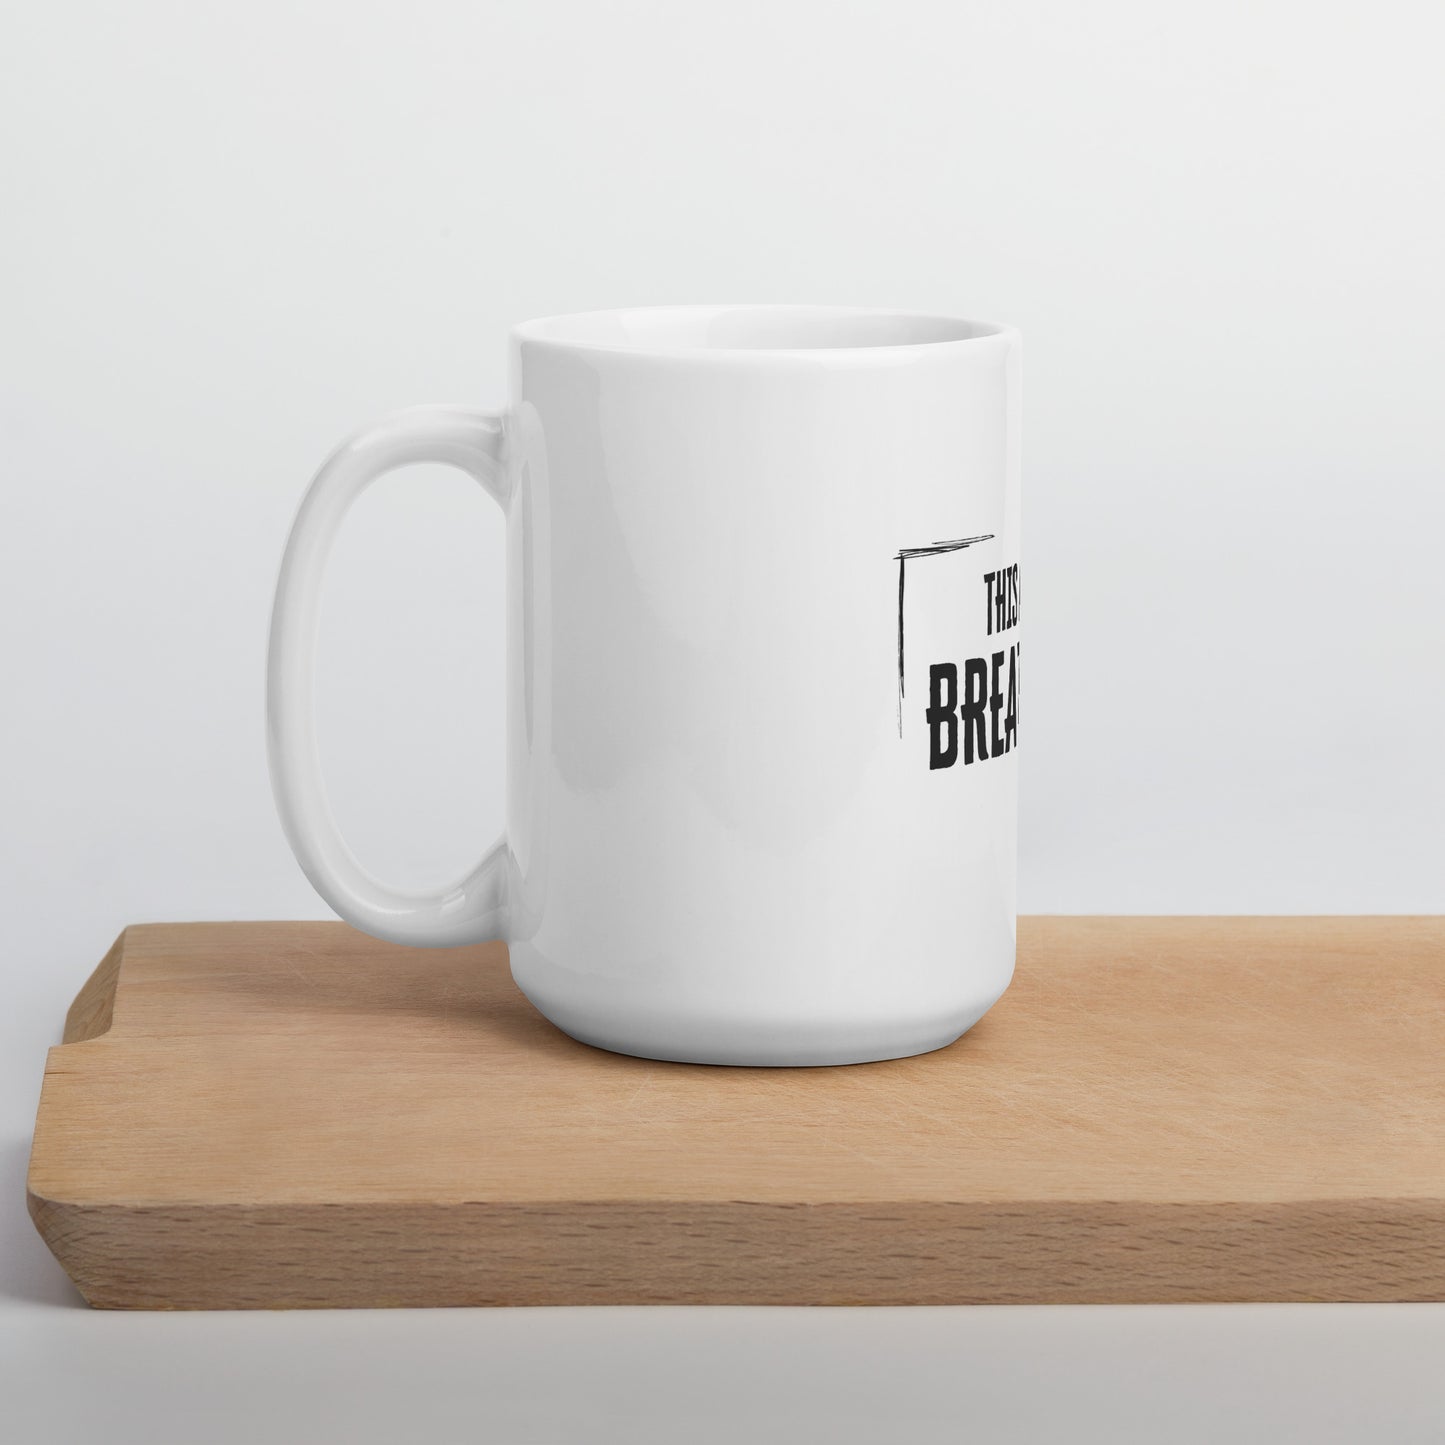 This Mug is Breathless (with Borders)